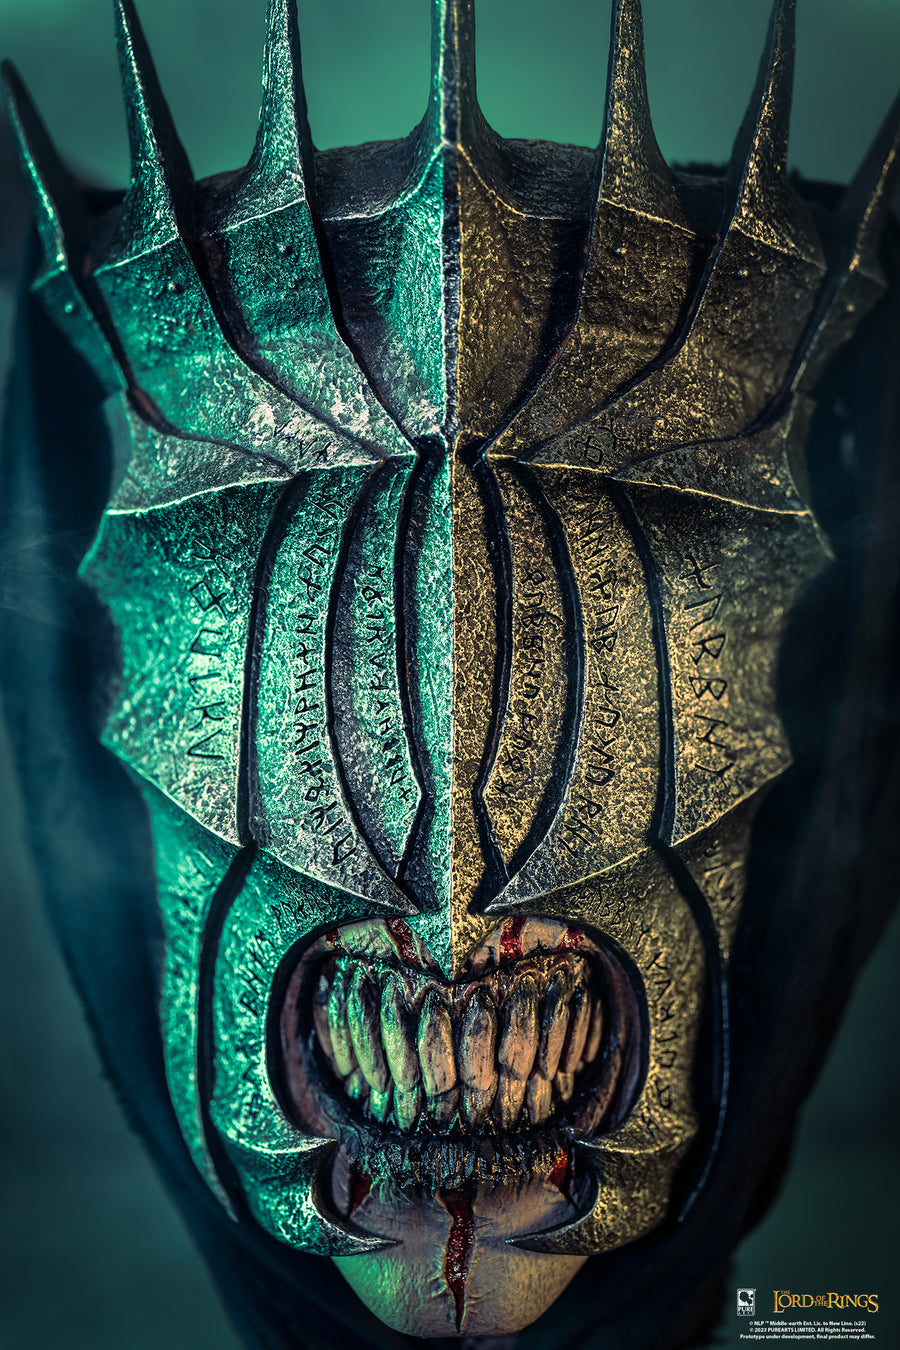 The Mouth of Sauron's Name Broke Sauron's Only Lord of the Rings Rule